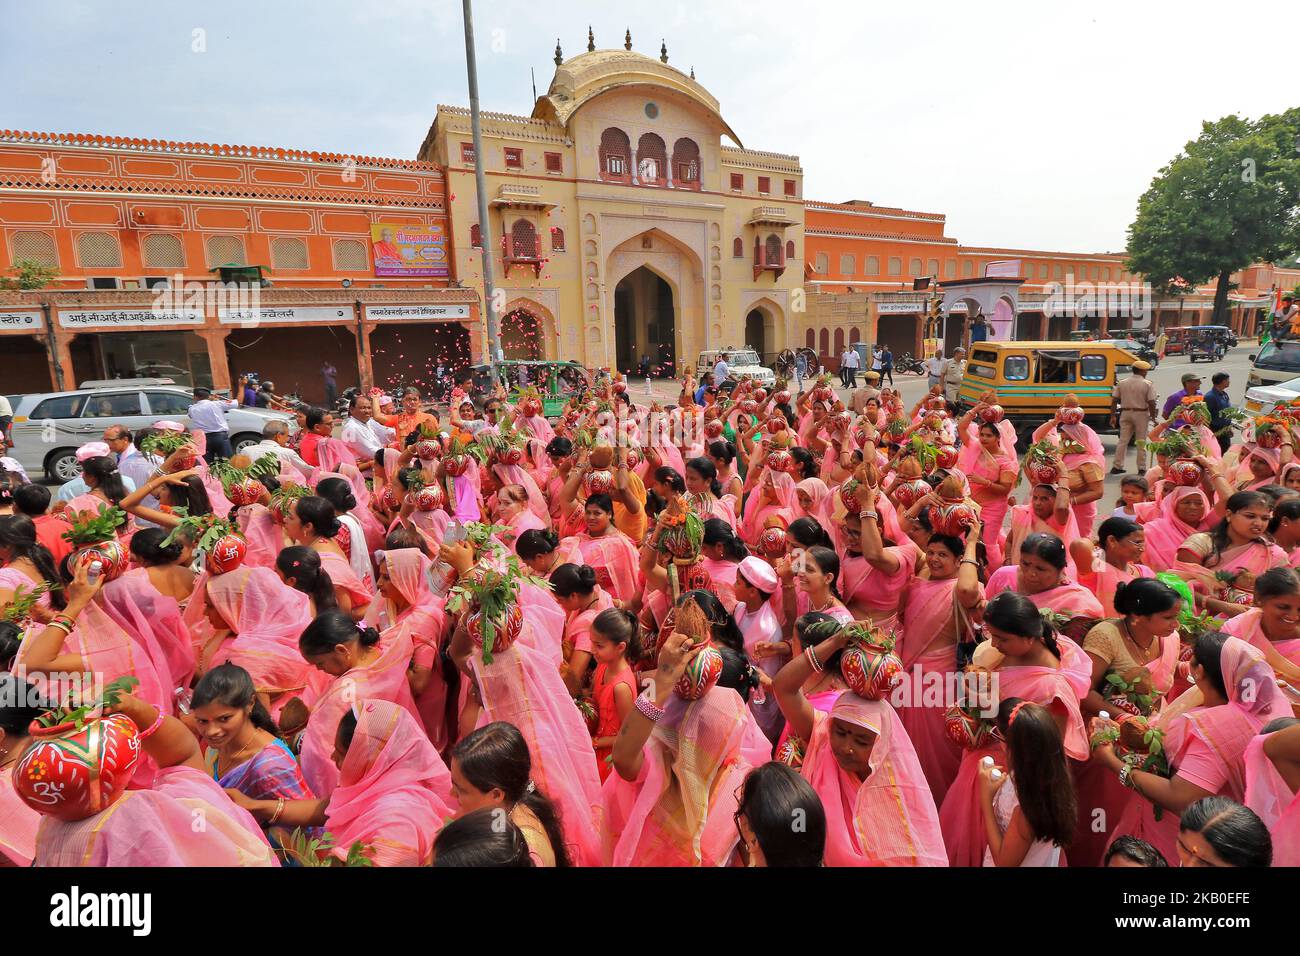 Lord Shiva devotees take part in the procession of Kalash and Kawad Yatra during the holy month of Sawan in Jaipur, Rajasthan, India, on August 19, 2018. Devotees carry holy water in the pots from river or shrine ponds to be poured on the Shivlinga in their hometown temples on the occasion of Sawan month.This journey on foot, when completed, is supposed to fulfill their wishes and endear them to Lord Shiva. (Photo by Vishal Bhatnagar/NurPhoto) Stock Photo